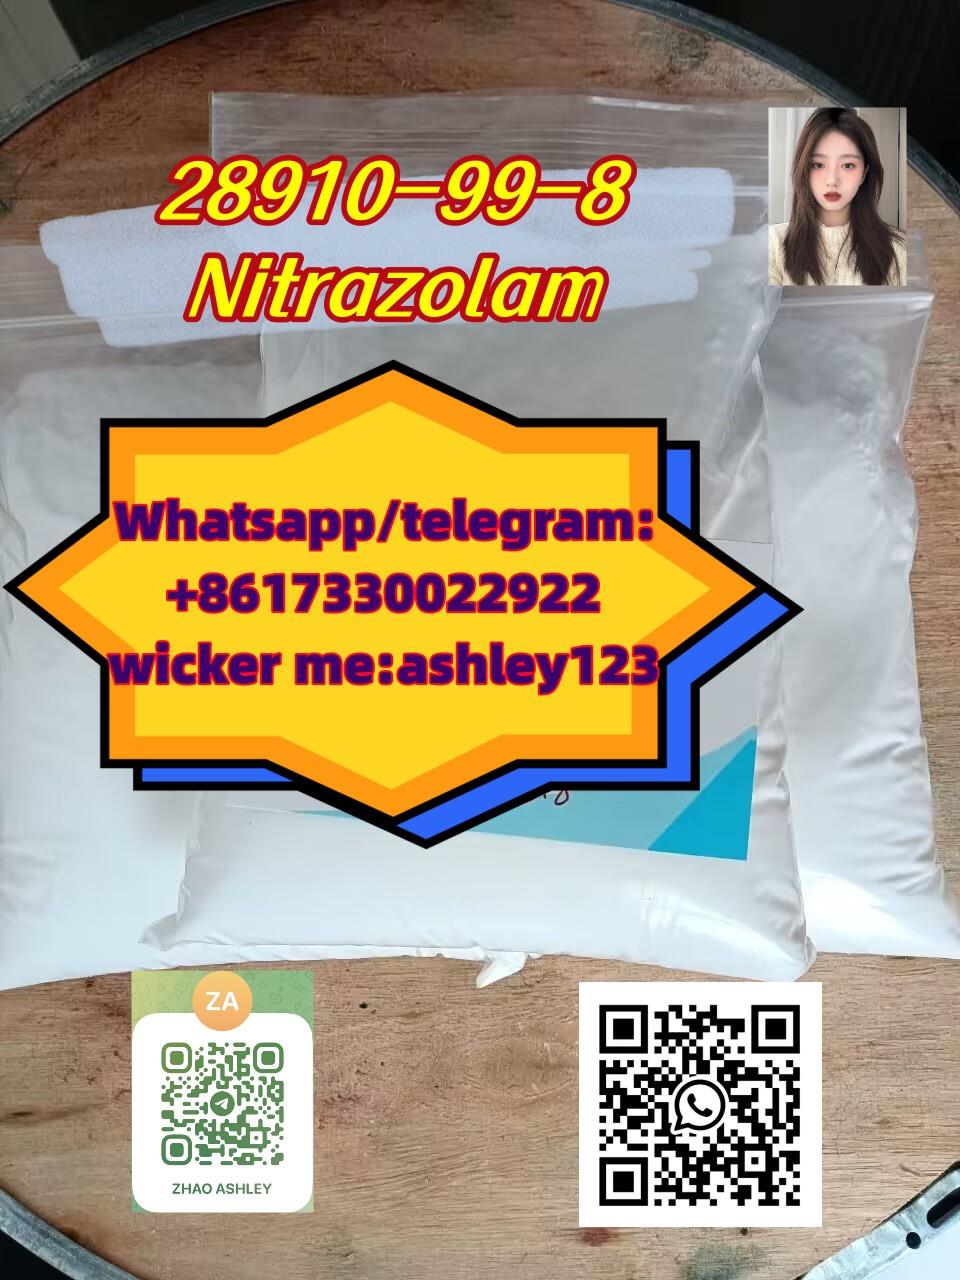 cas 28910-99-8 Nitrazolam Factory wholesale supply, competitive price!,cas 28910-99-8 Nitrazolam,ningnan ,Machinery and Process Equipment/Abrasive and Grinding Wheels